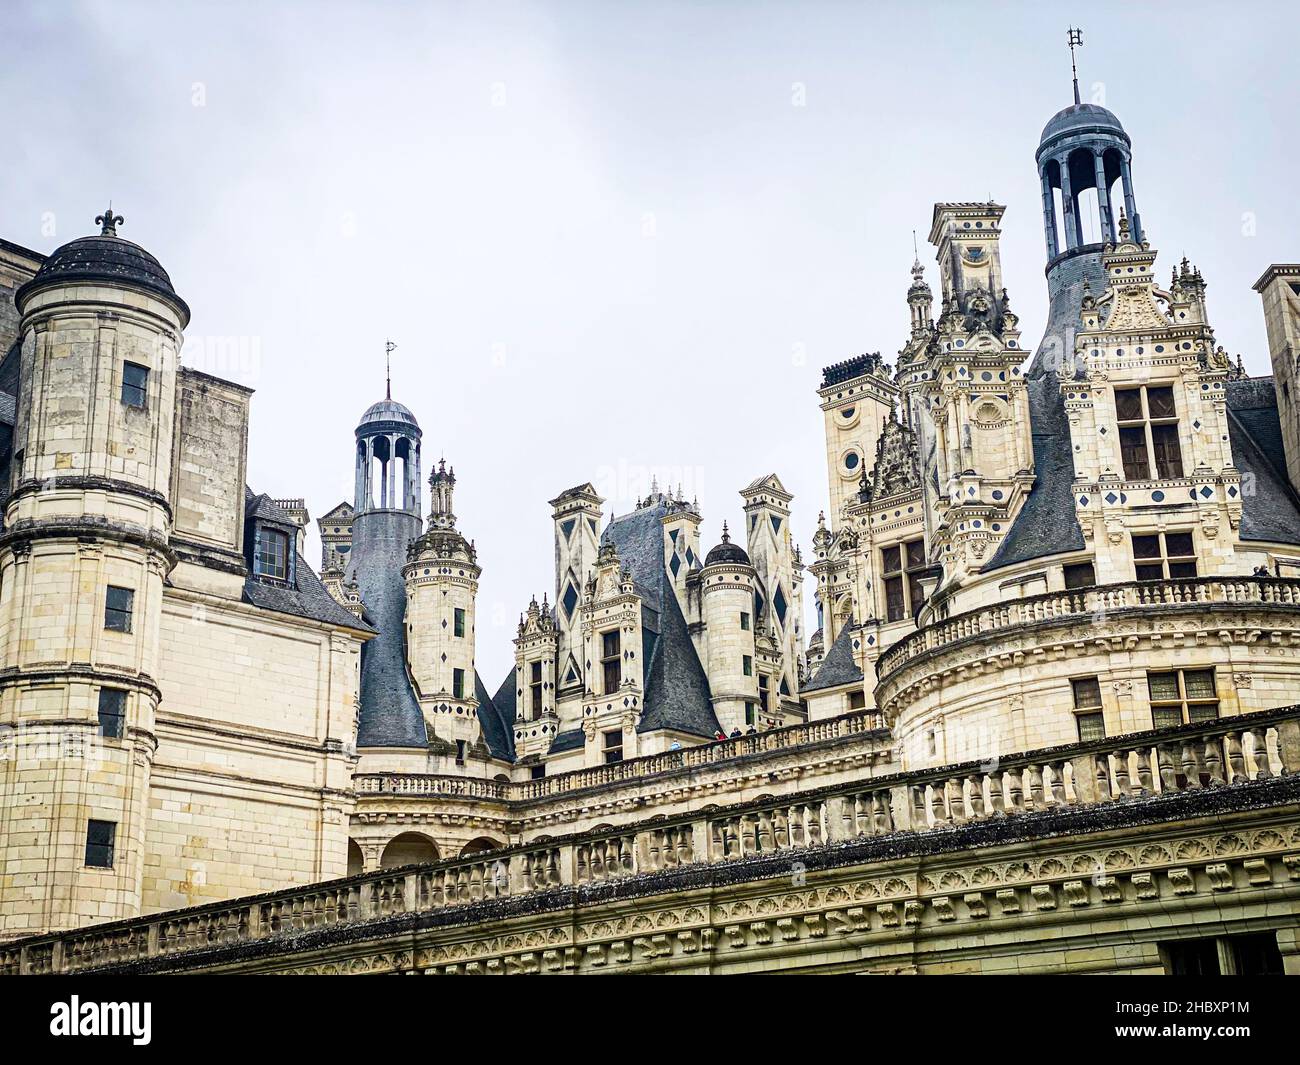 Chambord castle roofs and chimney Stock Photo